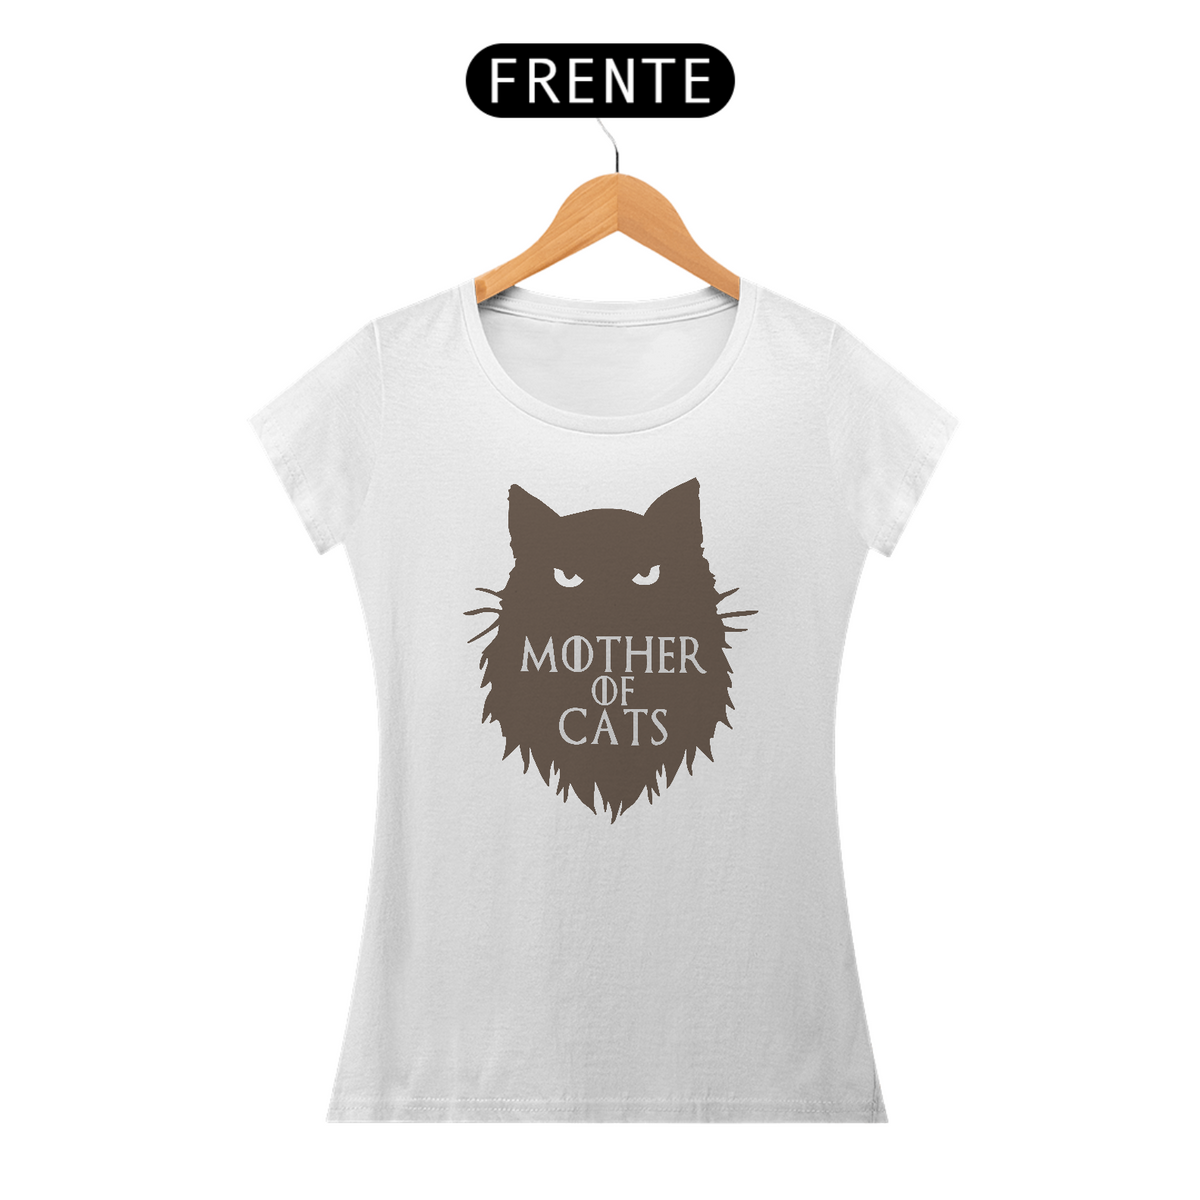 Nome do produto: Camisa Baby Long Classic Mother of Cats